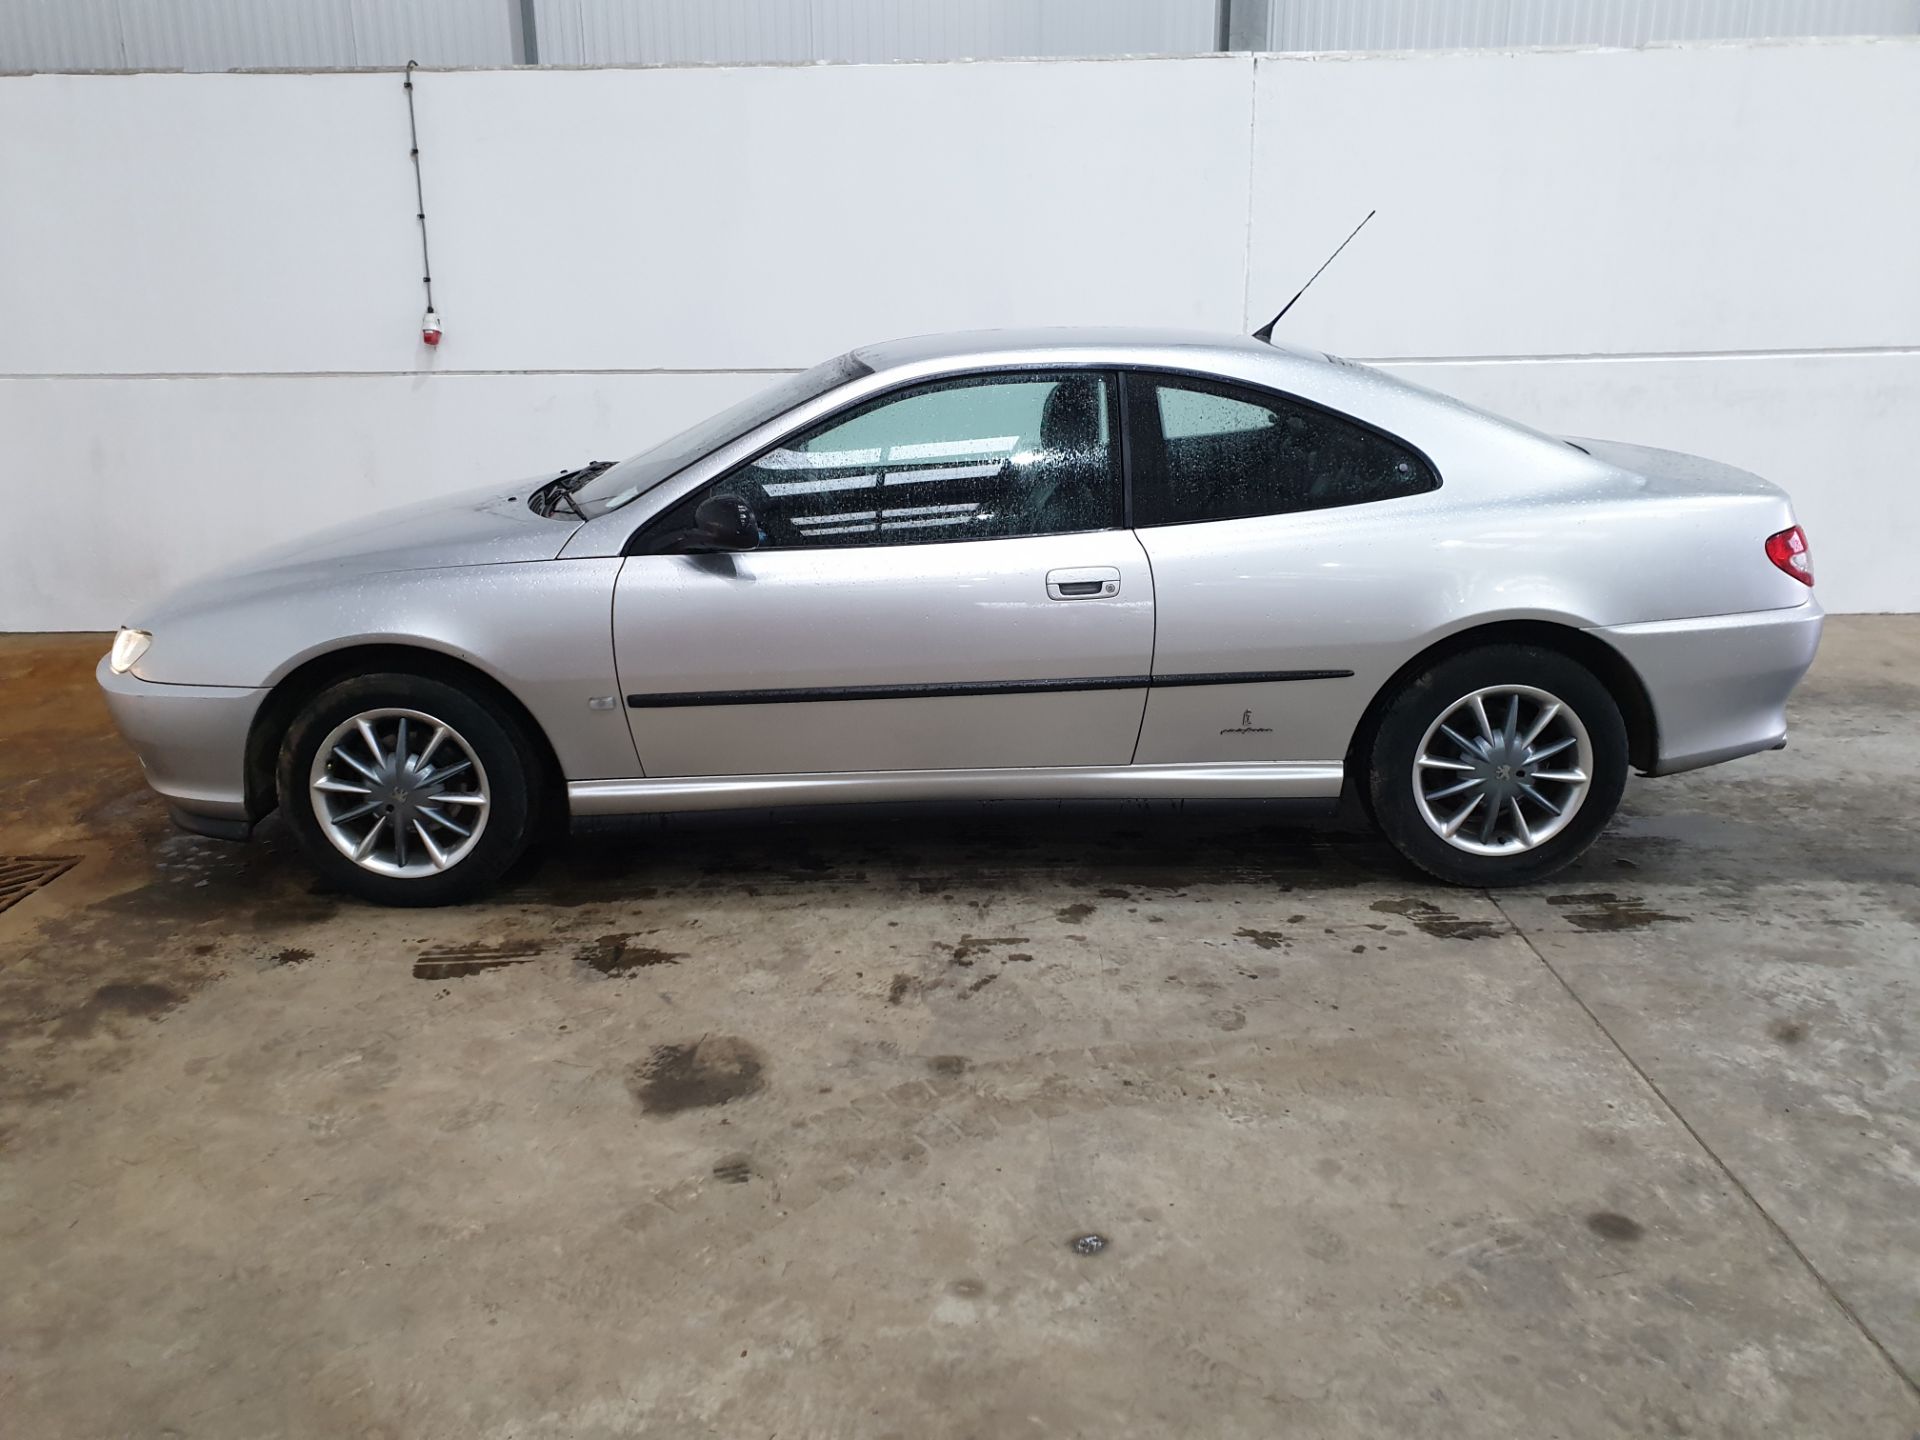 Peugeot 406 Coupe HDI, 2 owners, - Image 6 of 11